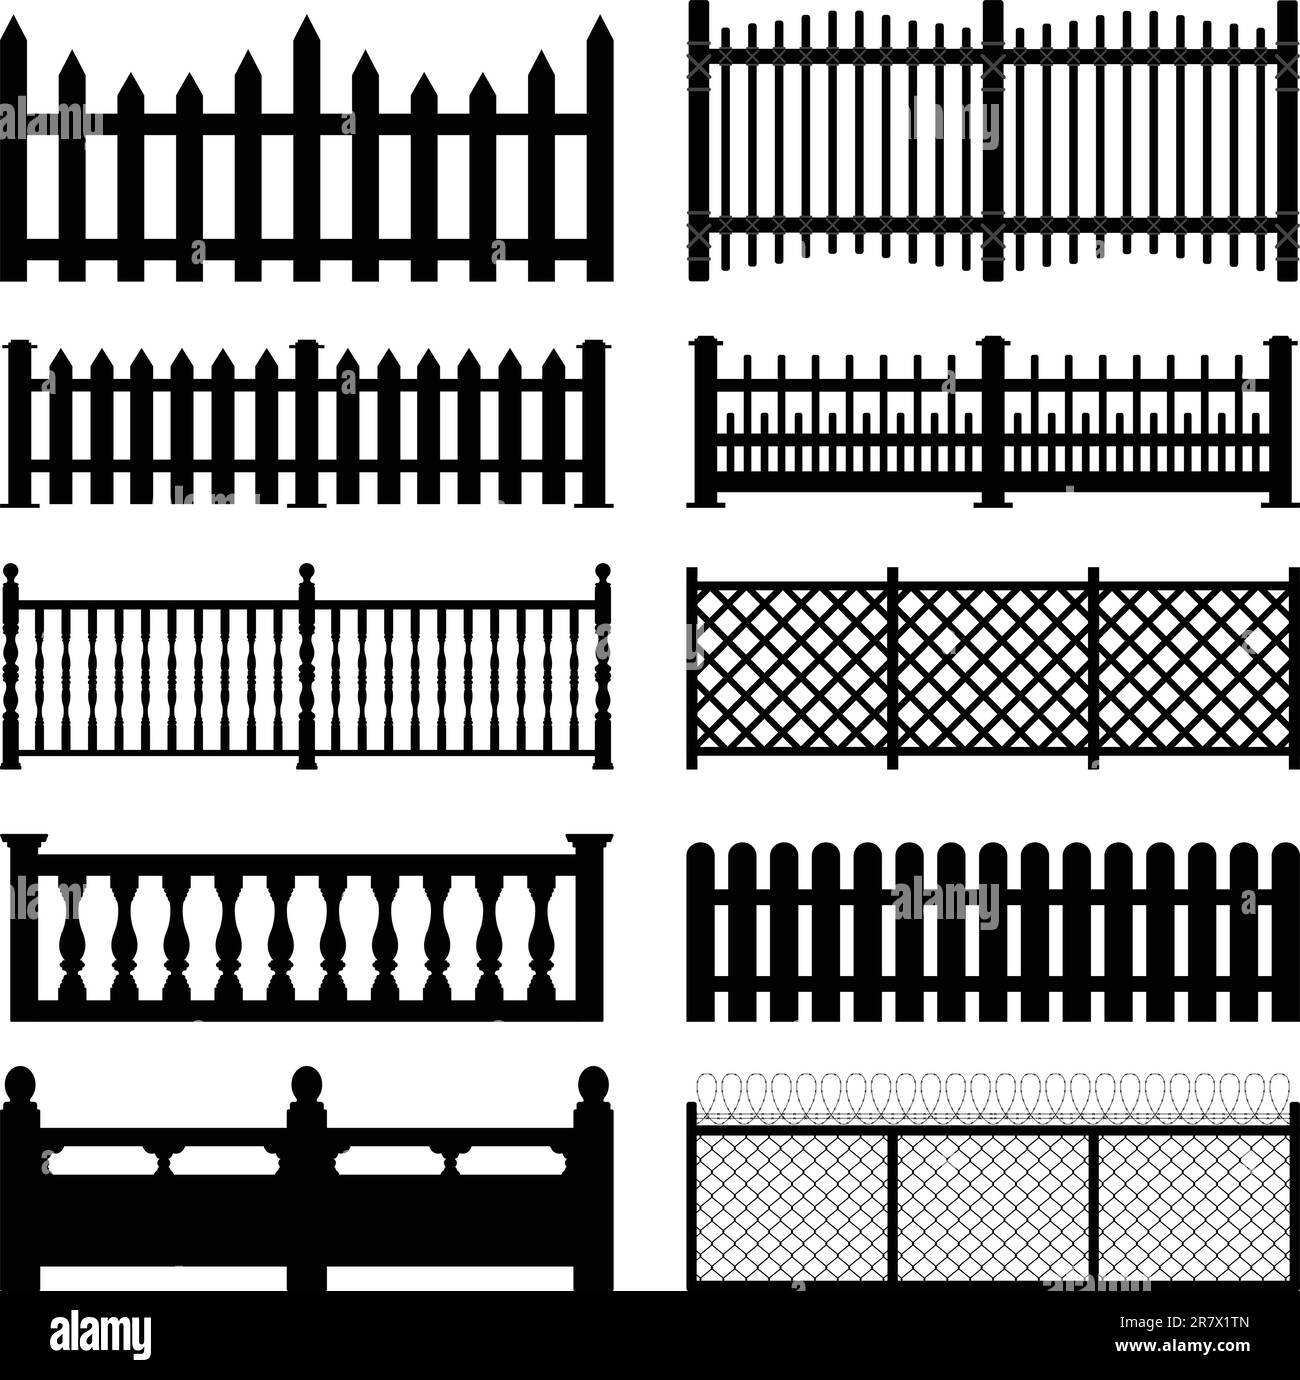 A set of fences and wall brick design. Stock Vector